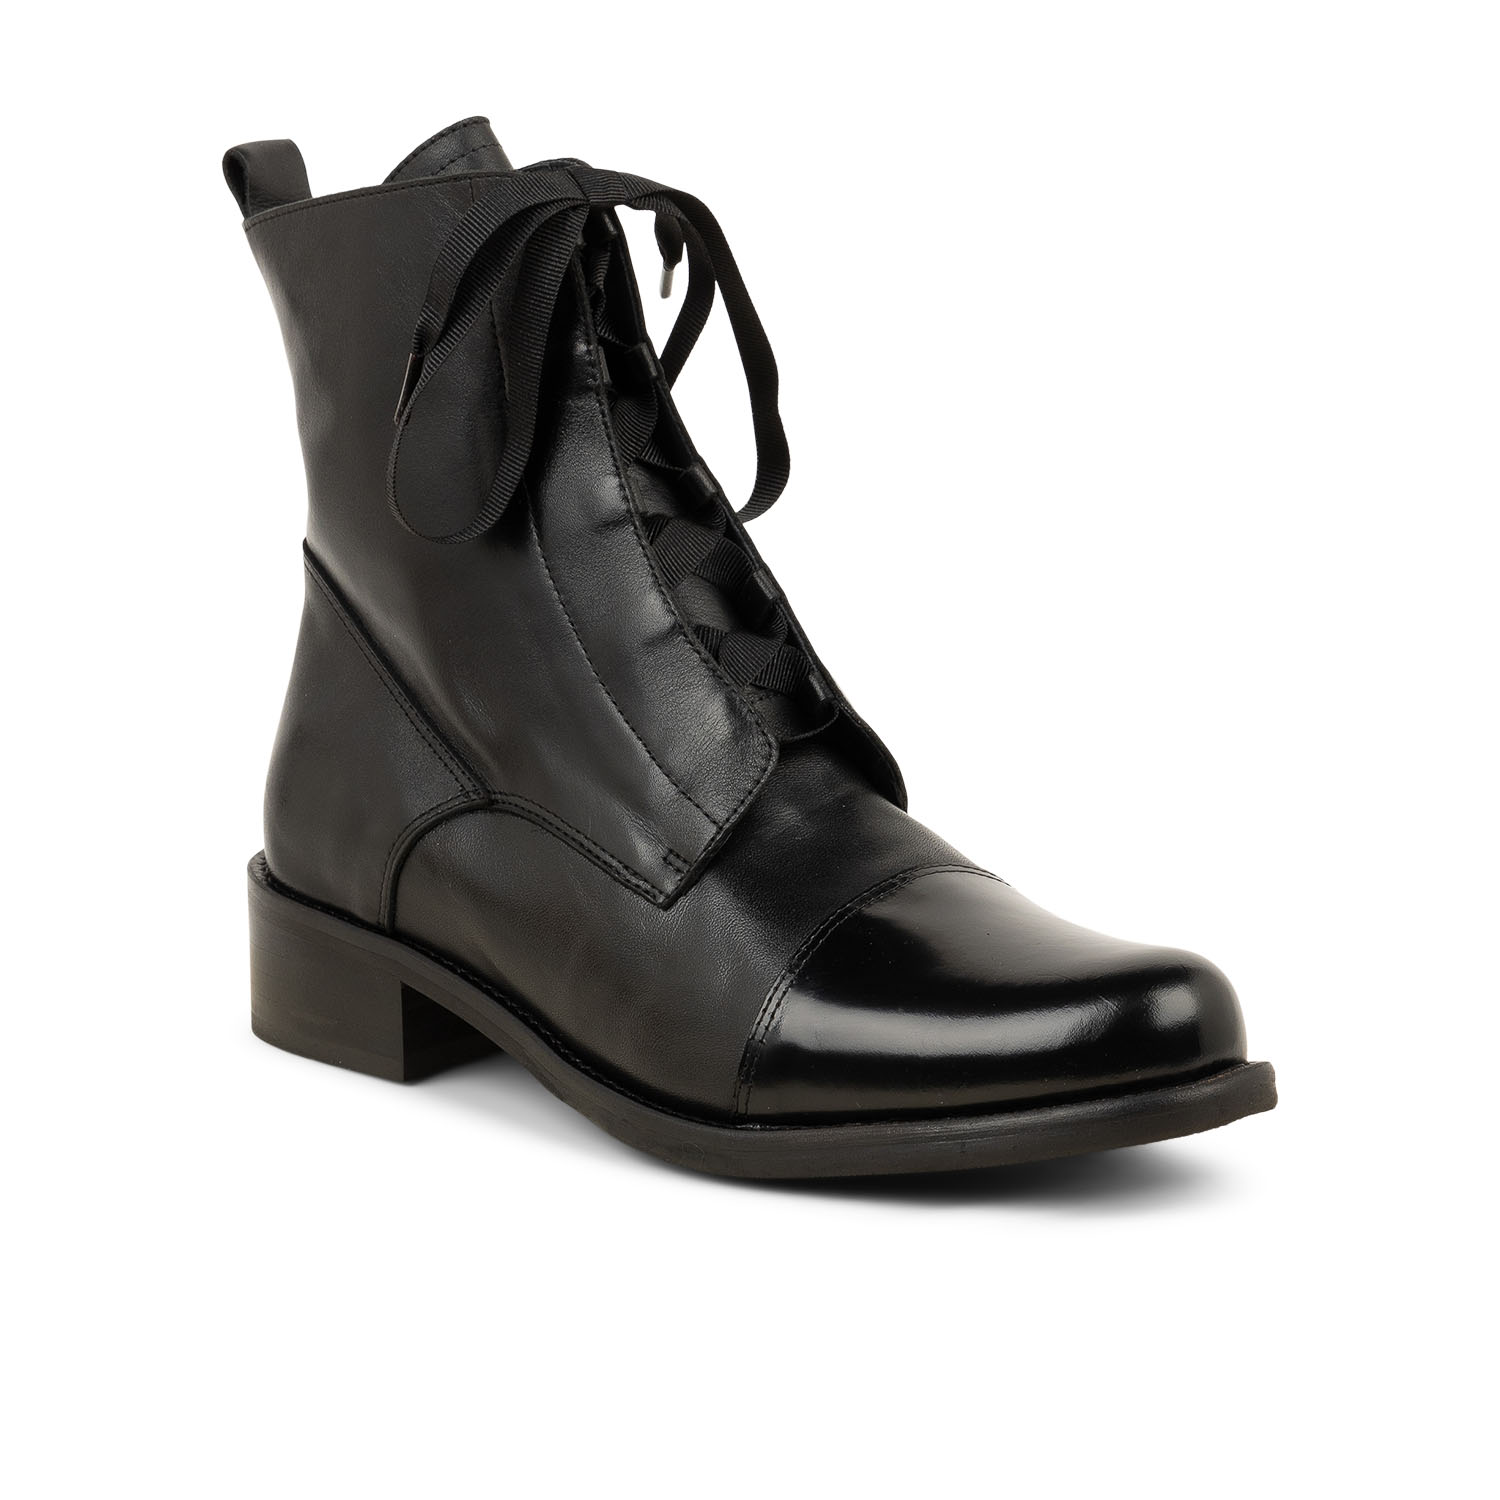 02 - MYSTYLE - MYMA - Boots et bottines - Cuir